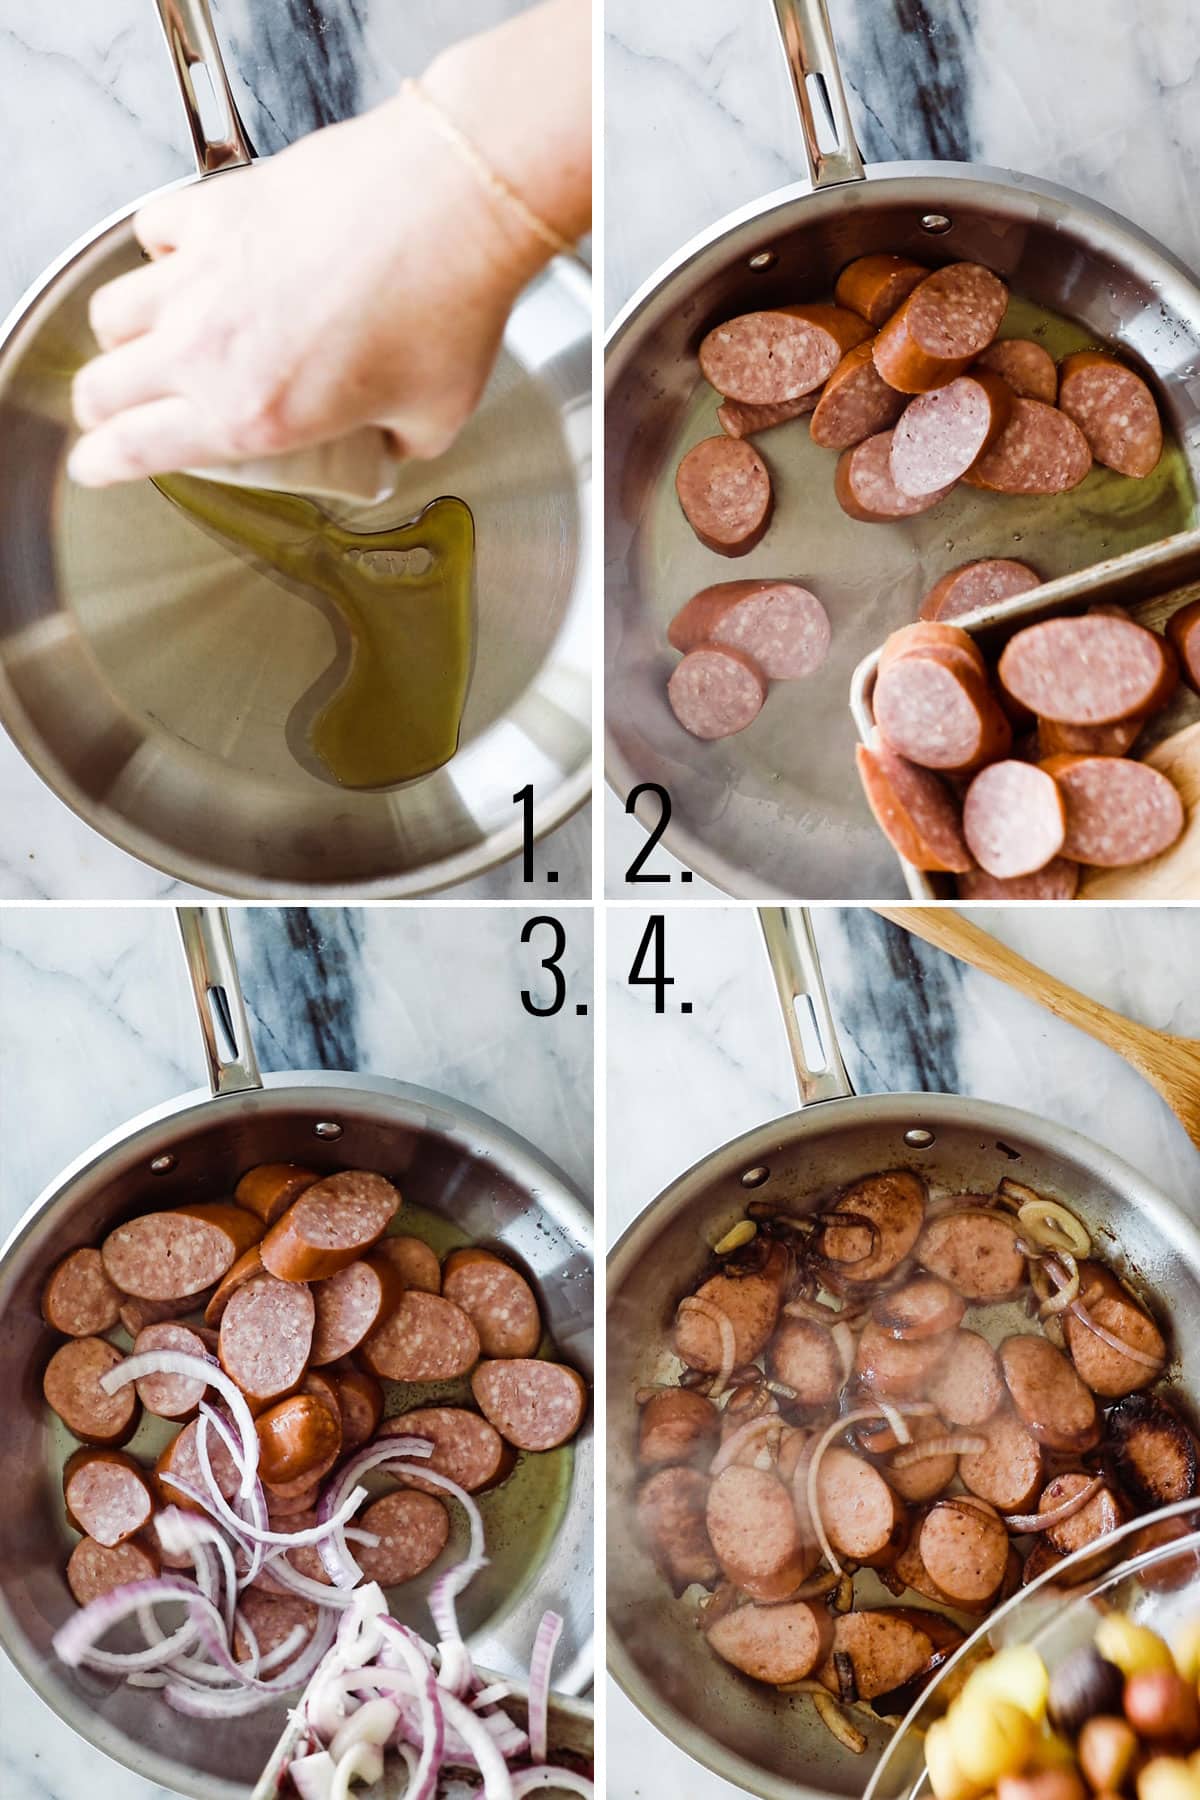 Collage of images showing how to make potatoes and kielbasa recipe.